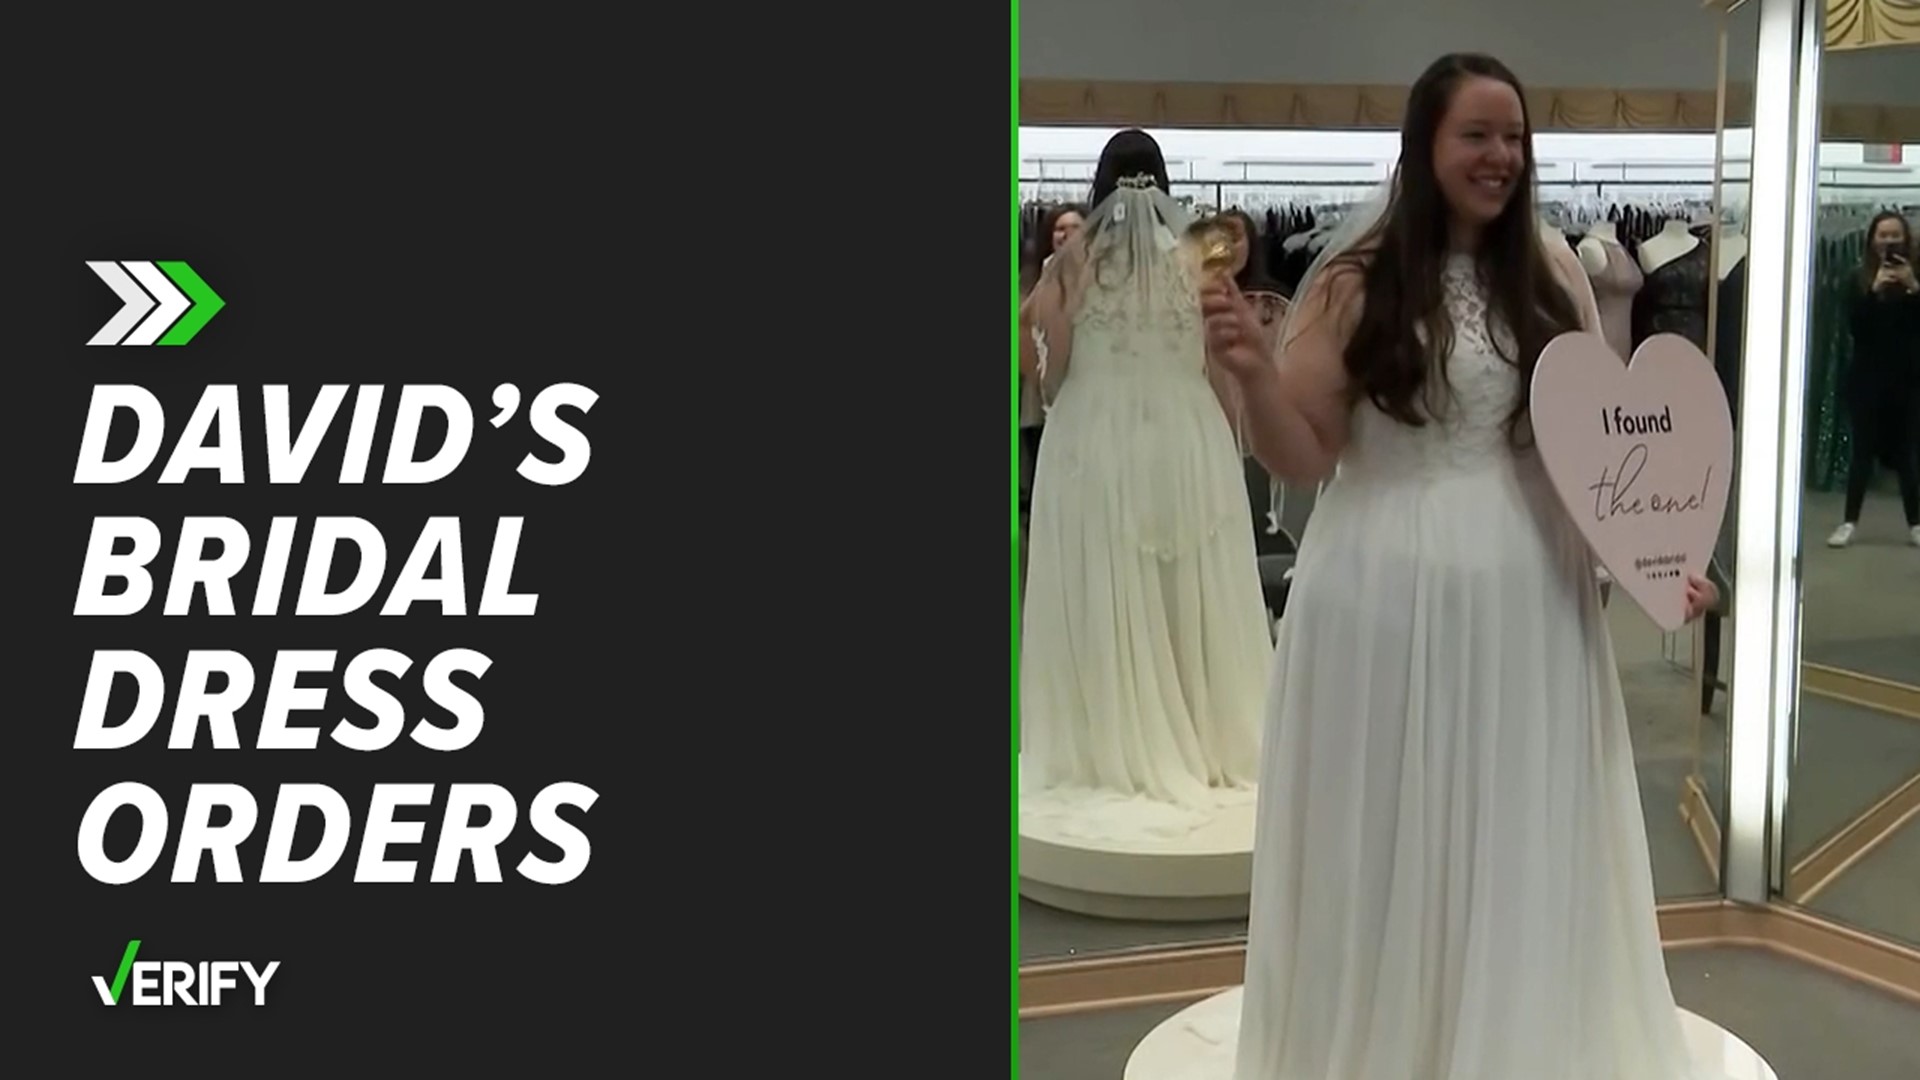 David's Bridal is still fulfilling new and existing orders, returns and exchanges following its second bankruptcy filing in the last five years.